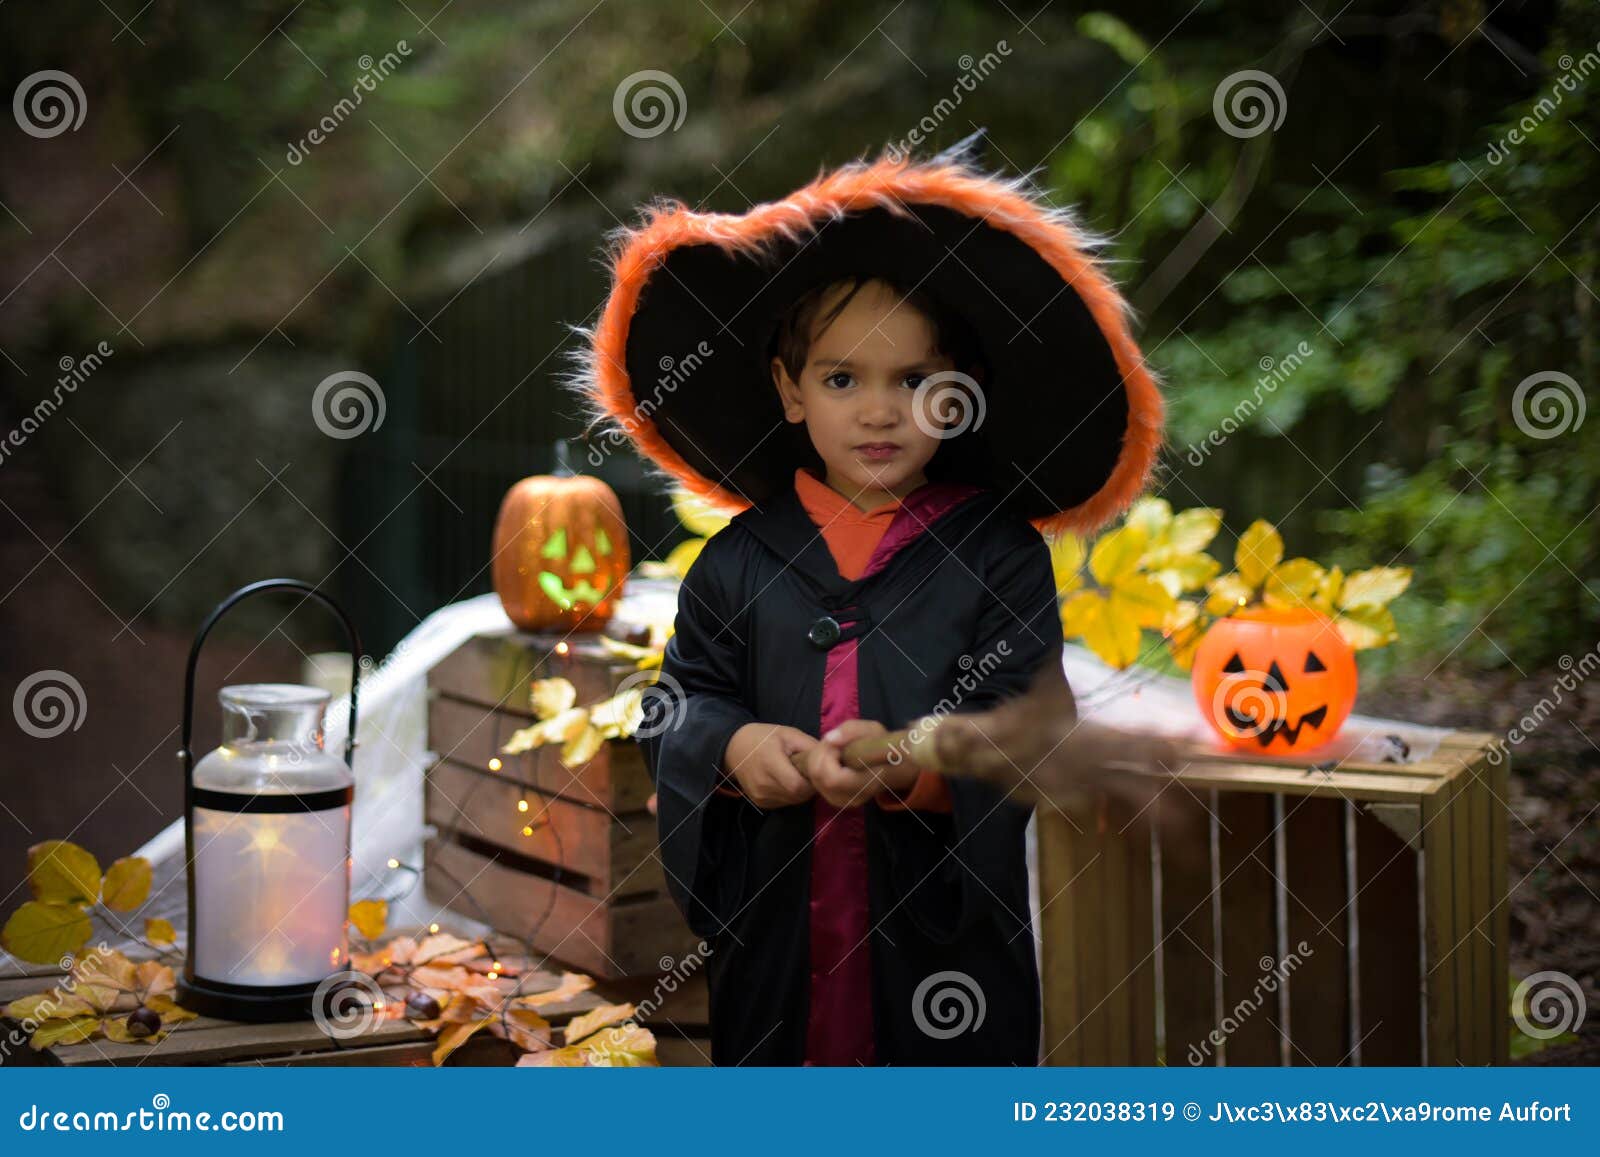 Young Child Dressed As a Wizard in a Halloween Setting Stock Image ...